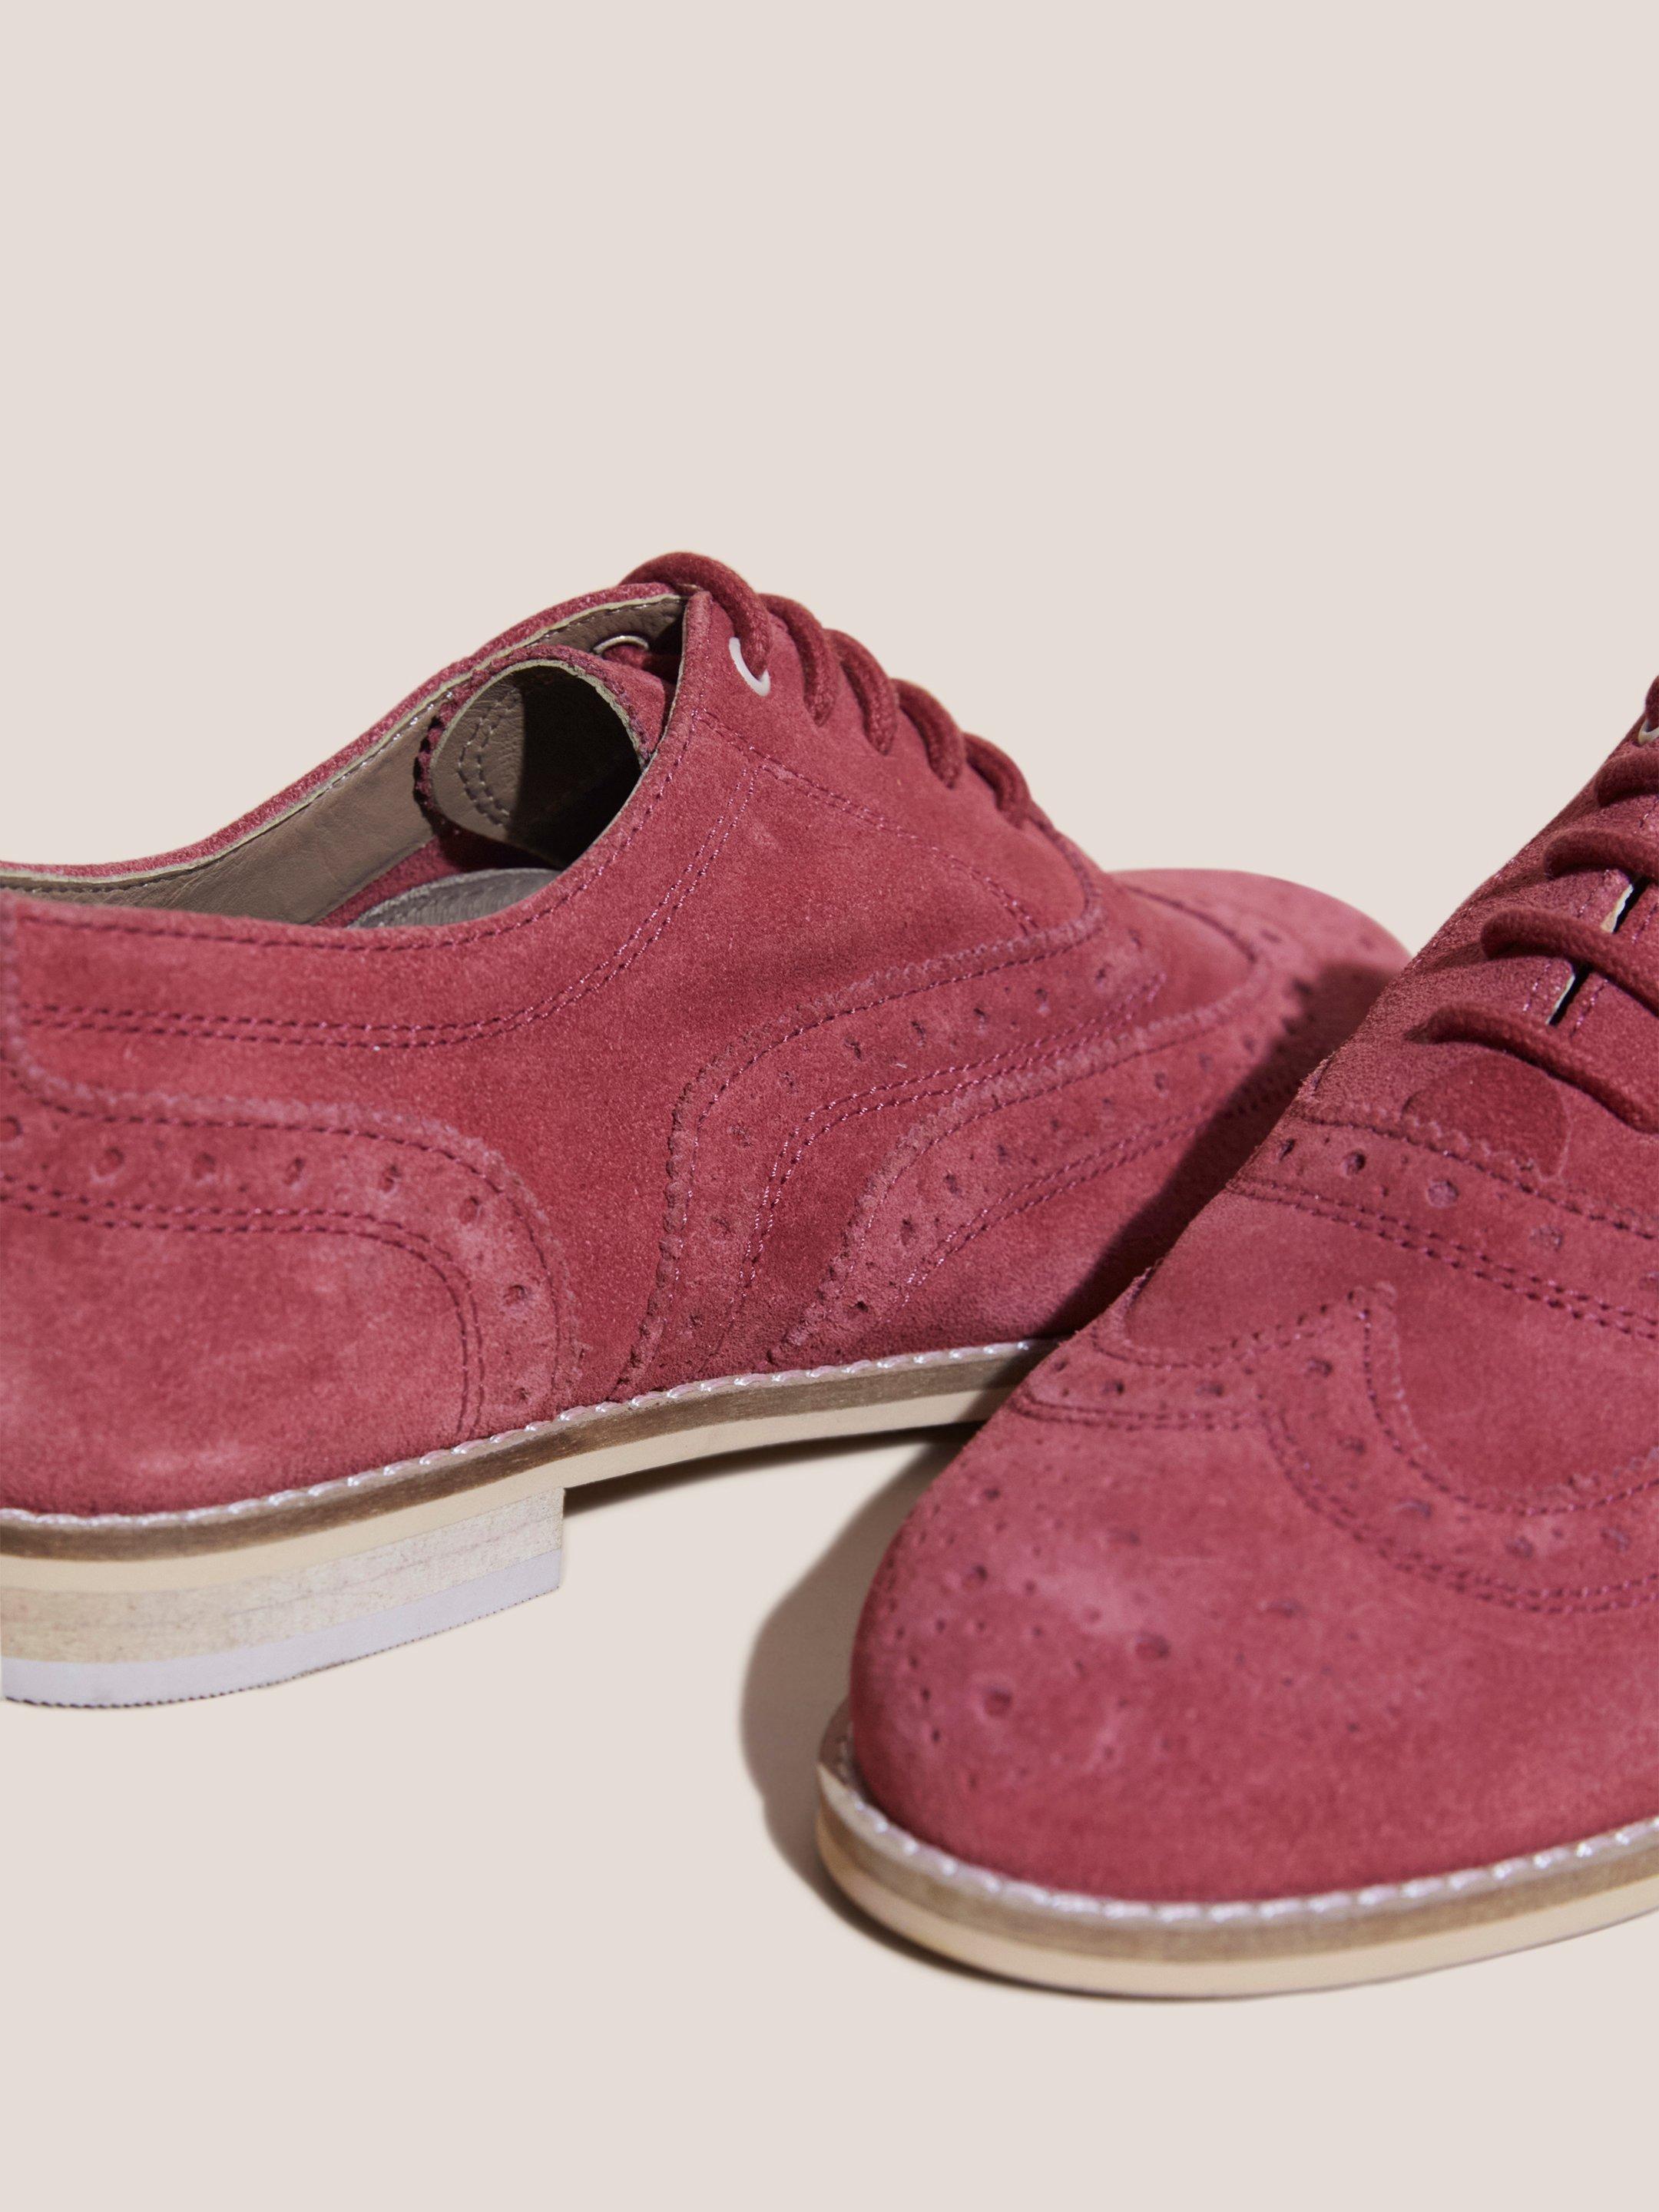 Thistle Lace Up Brogue in BRT PINK - FLAT DETAIL